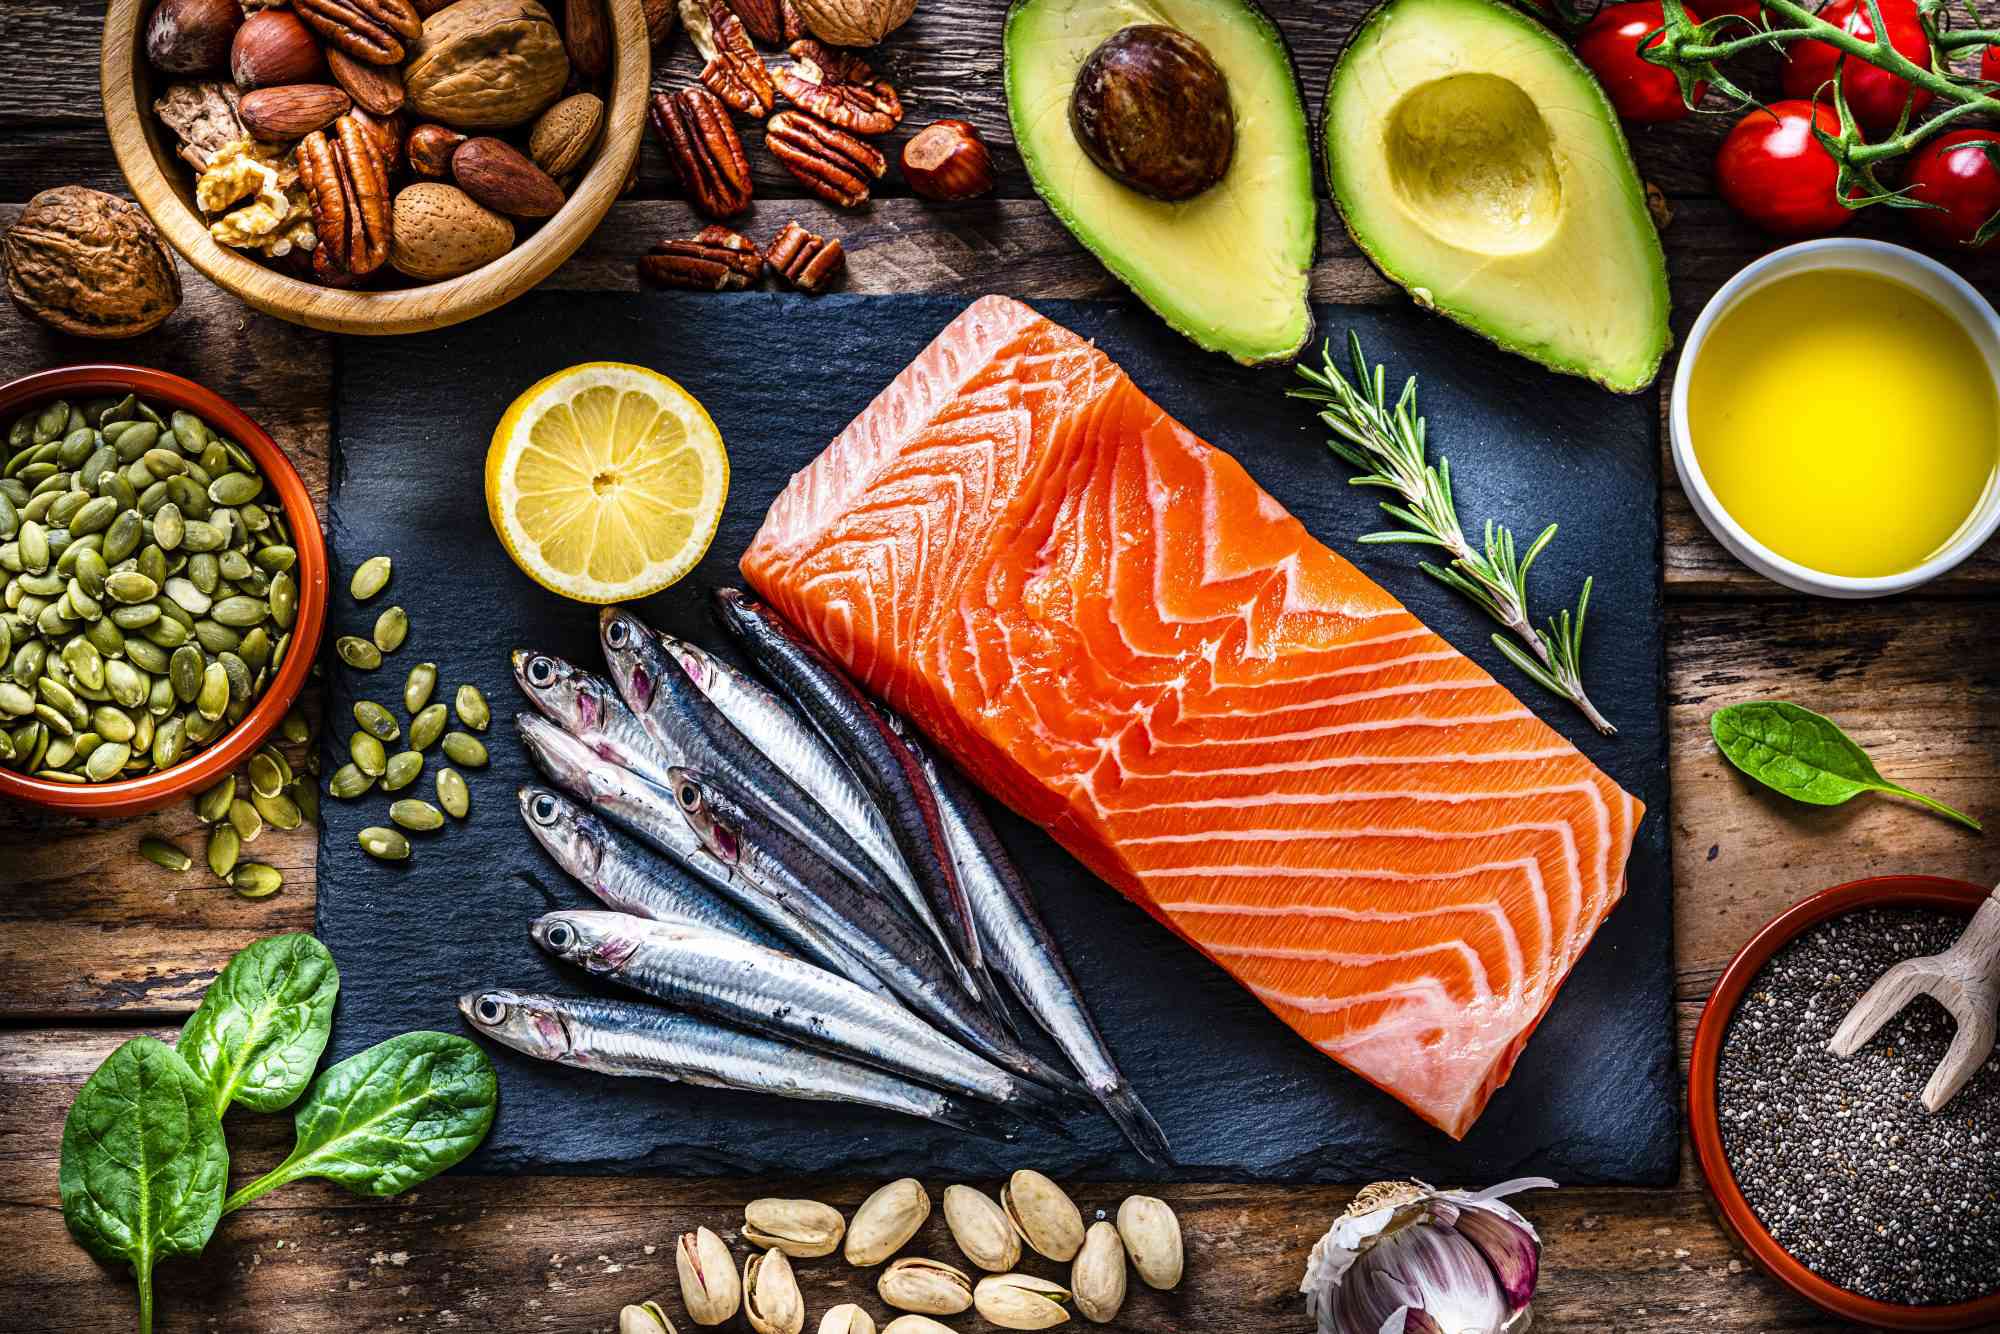 12 Healthy Foods That Are High in Iron